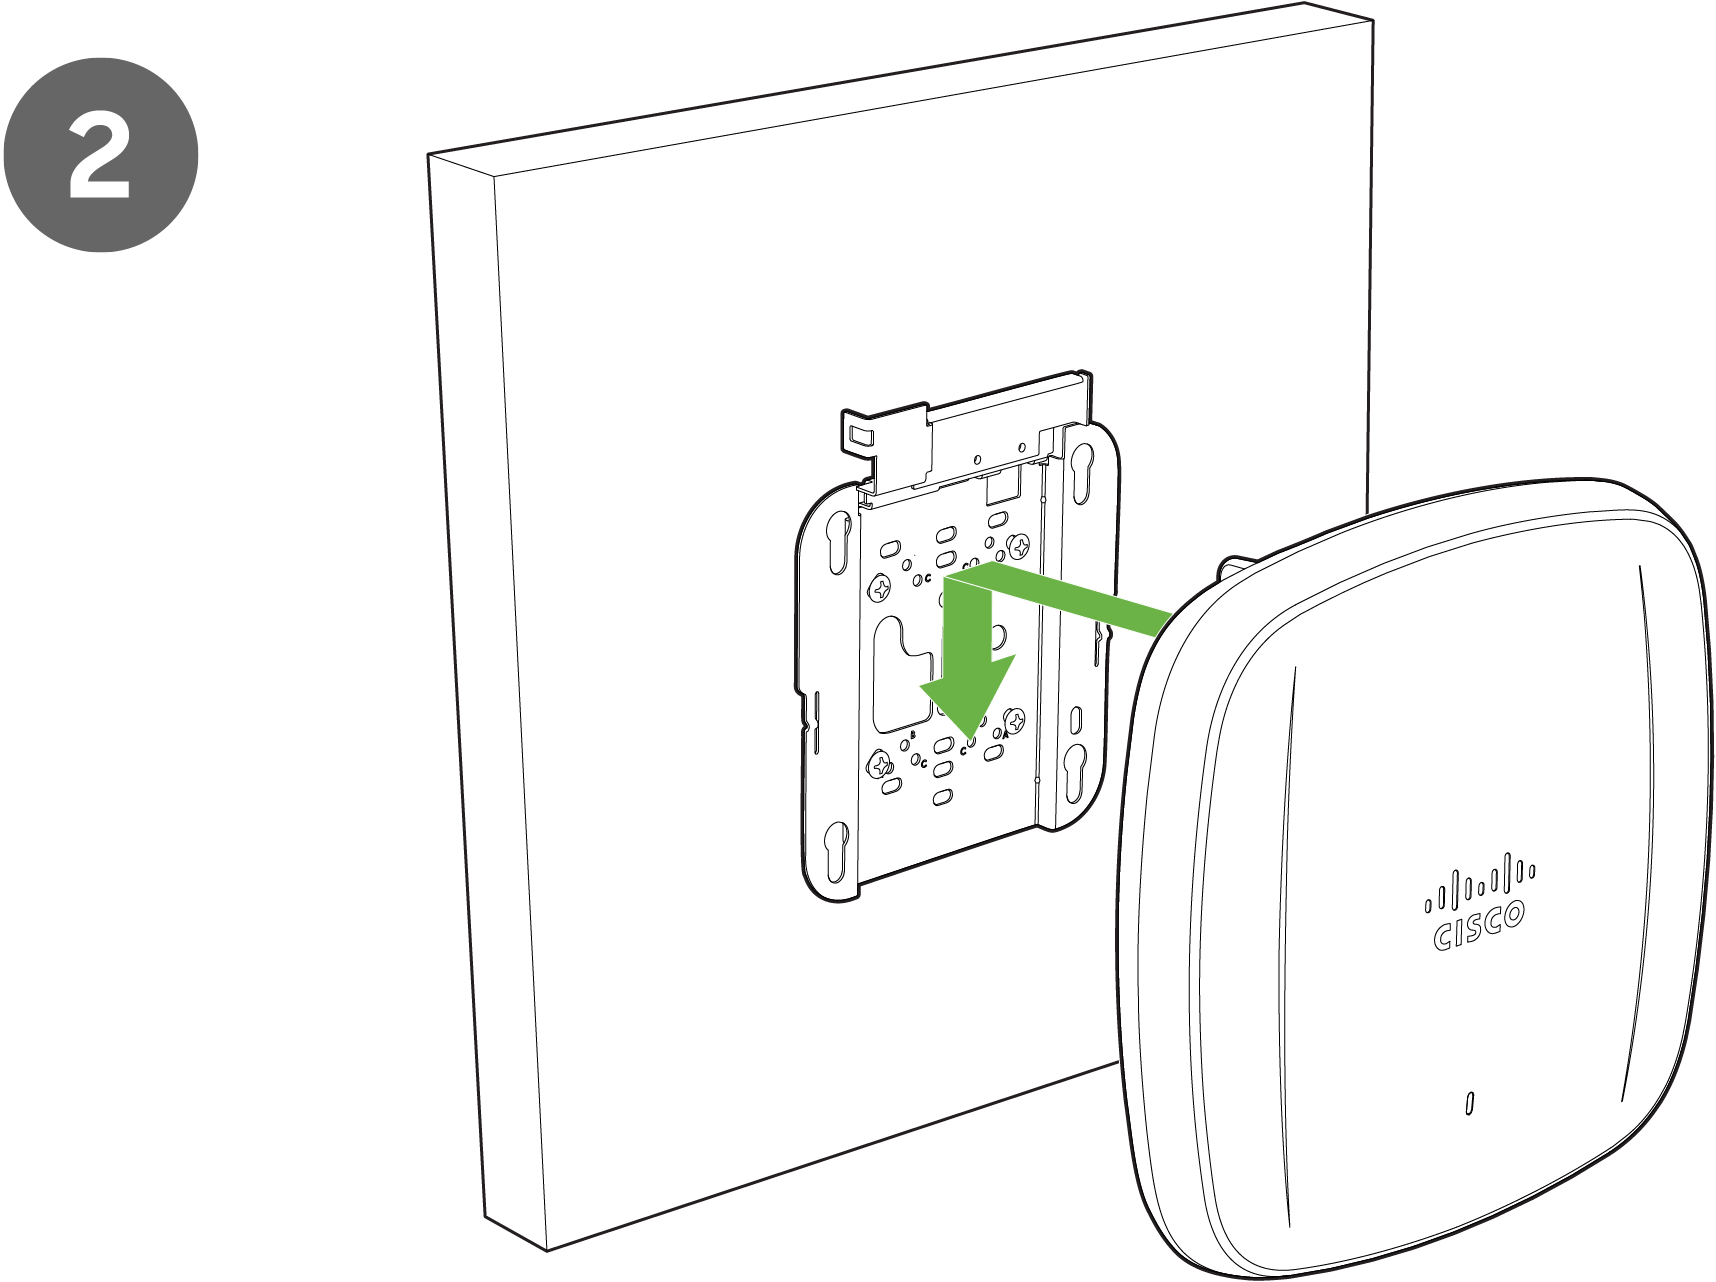 Image showing attaching the AP to the universal mounting bracket properly, with an arrow showing how to align the access point feet over the keyhole mounting slots on the mounting bracket.